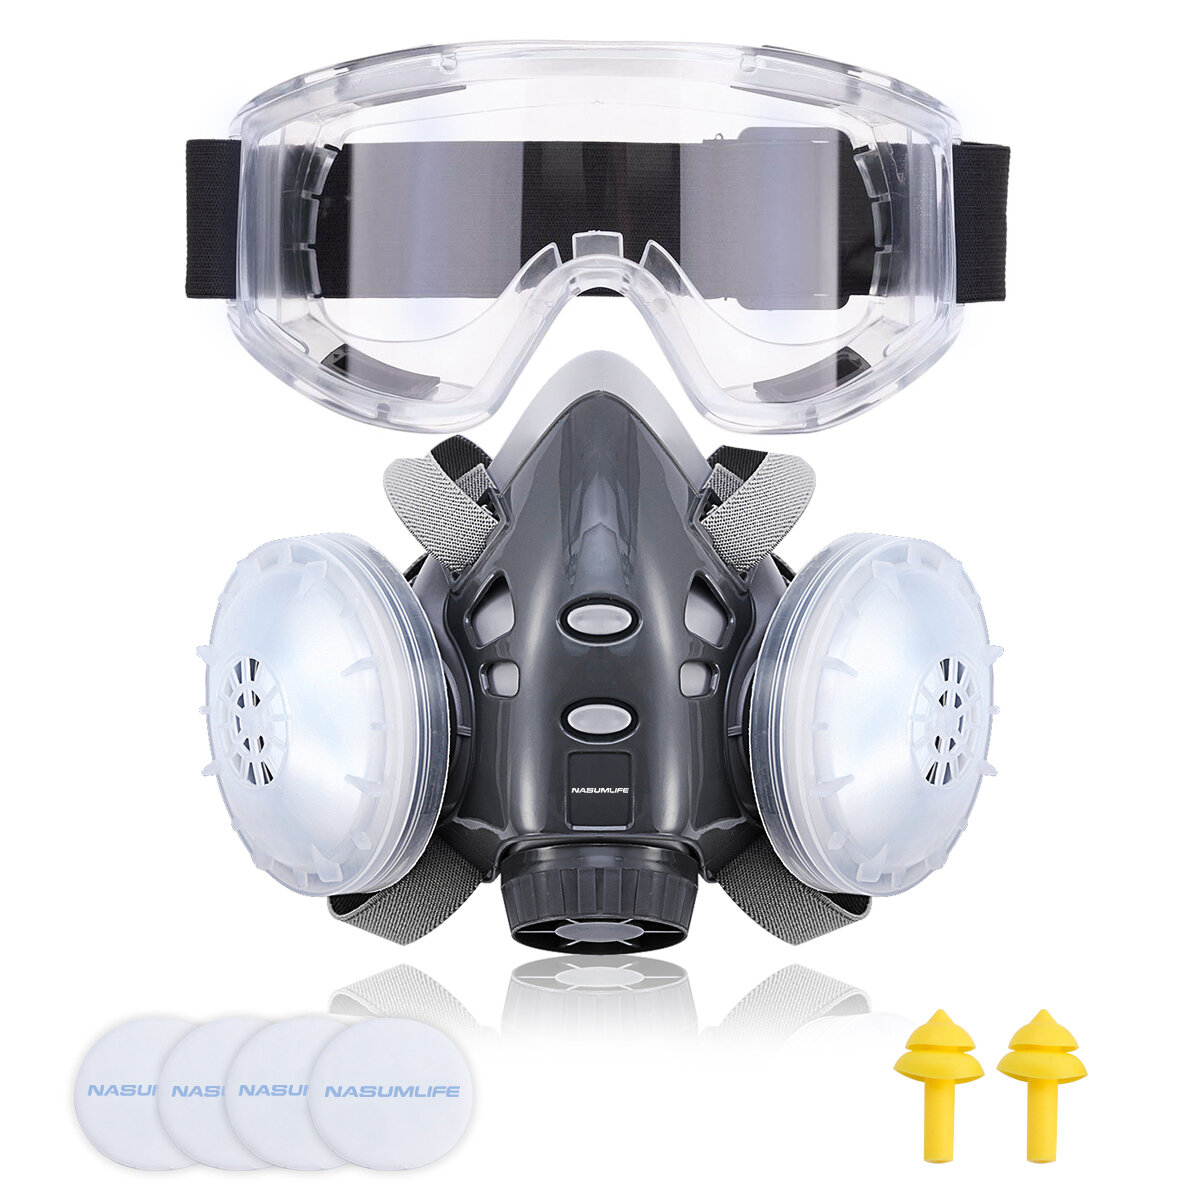 NASUM 308 Respiratory Face Cover Mask Reusable Glasses Goggle with Ear Plugs Filters for Dust Protec